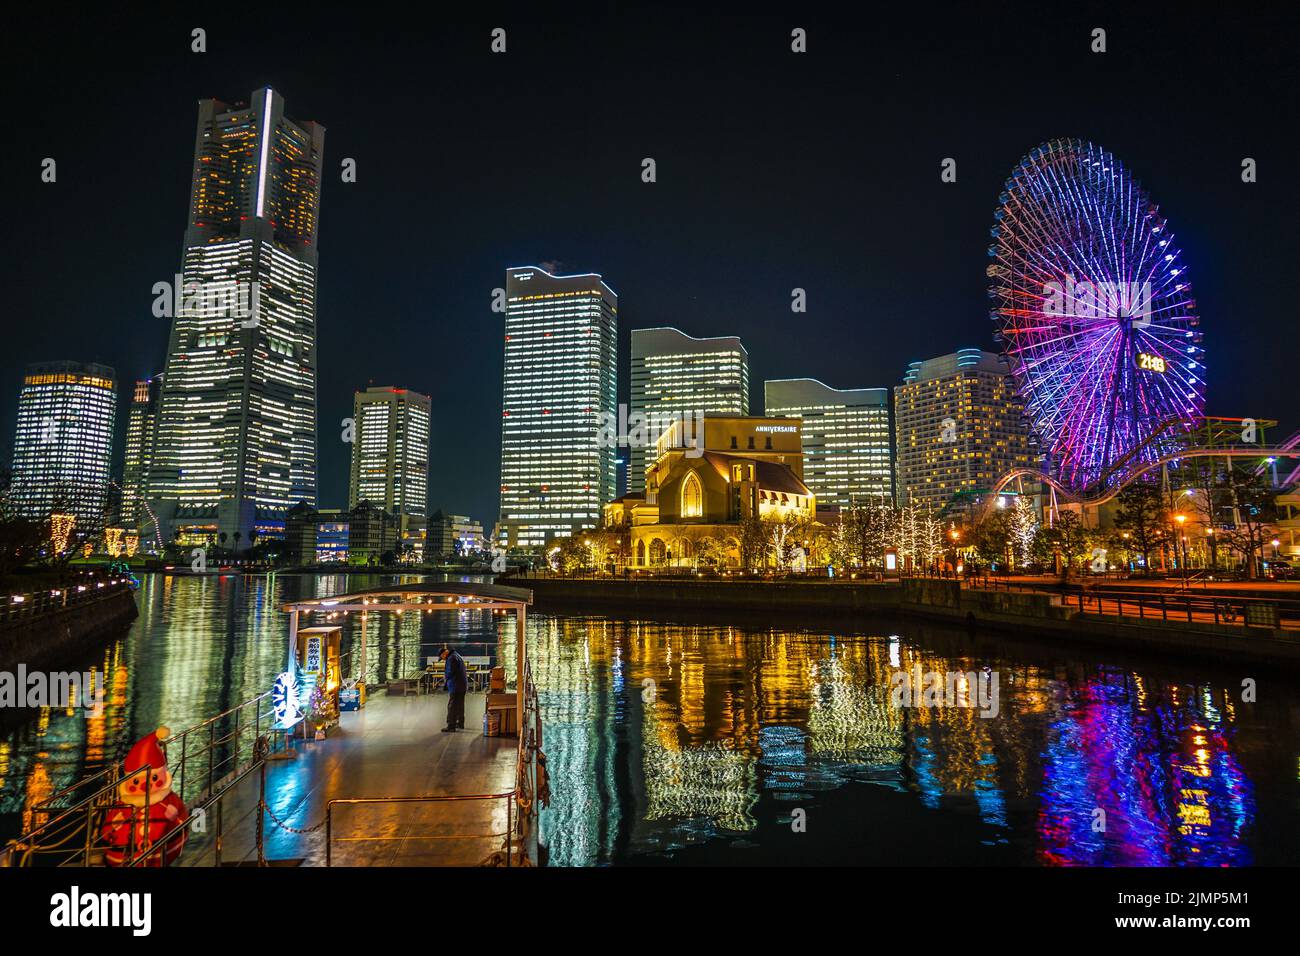 All Public and Private spaces light up in the Minato Mirai office Stock Photo